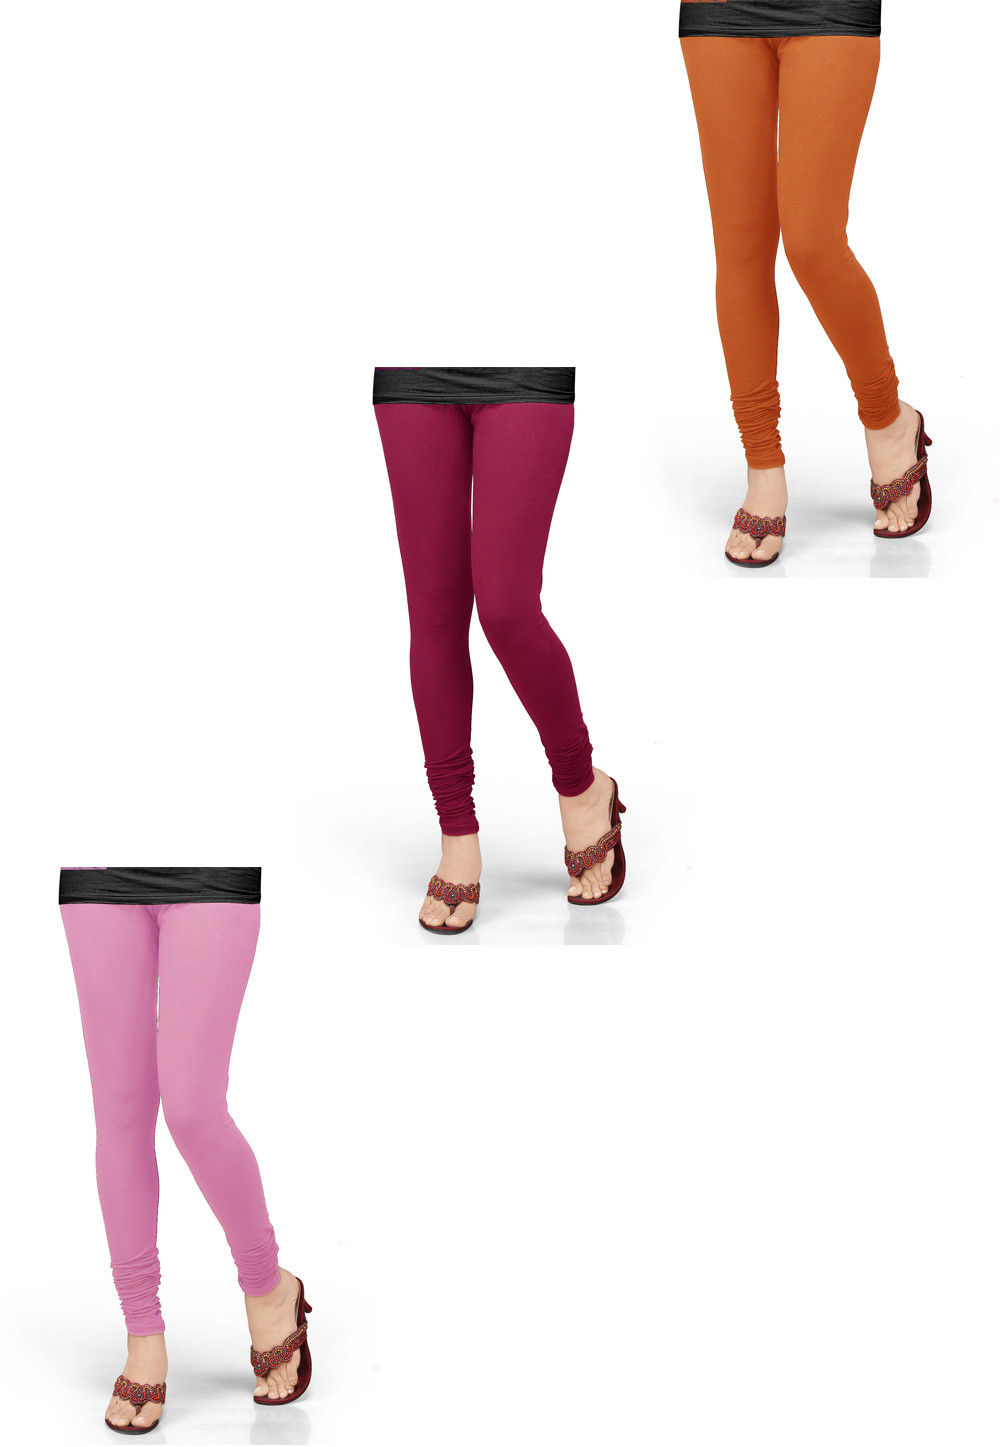 Combo of Solid Color Lycra Leggings in Orange and Pink